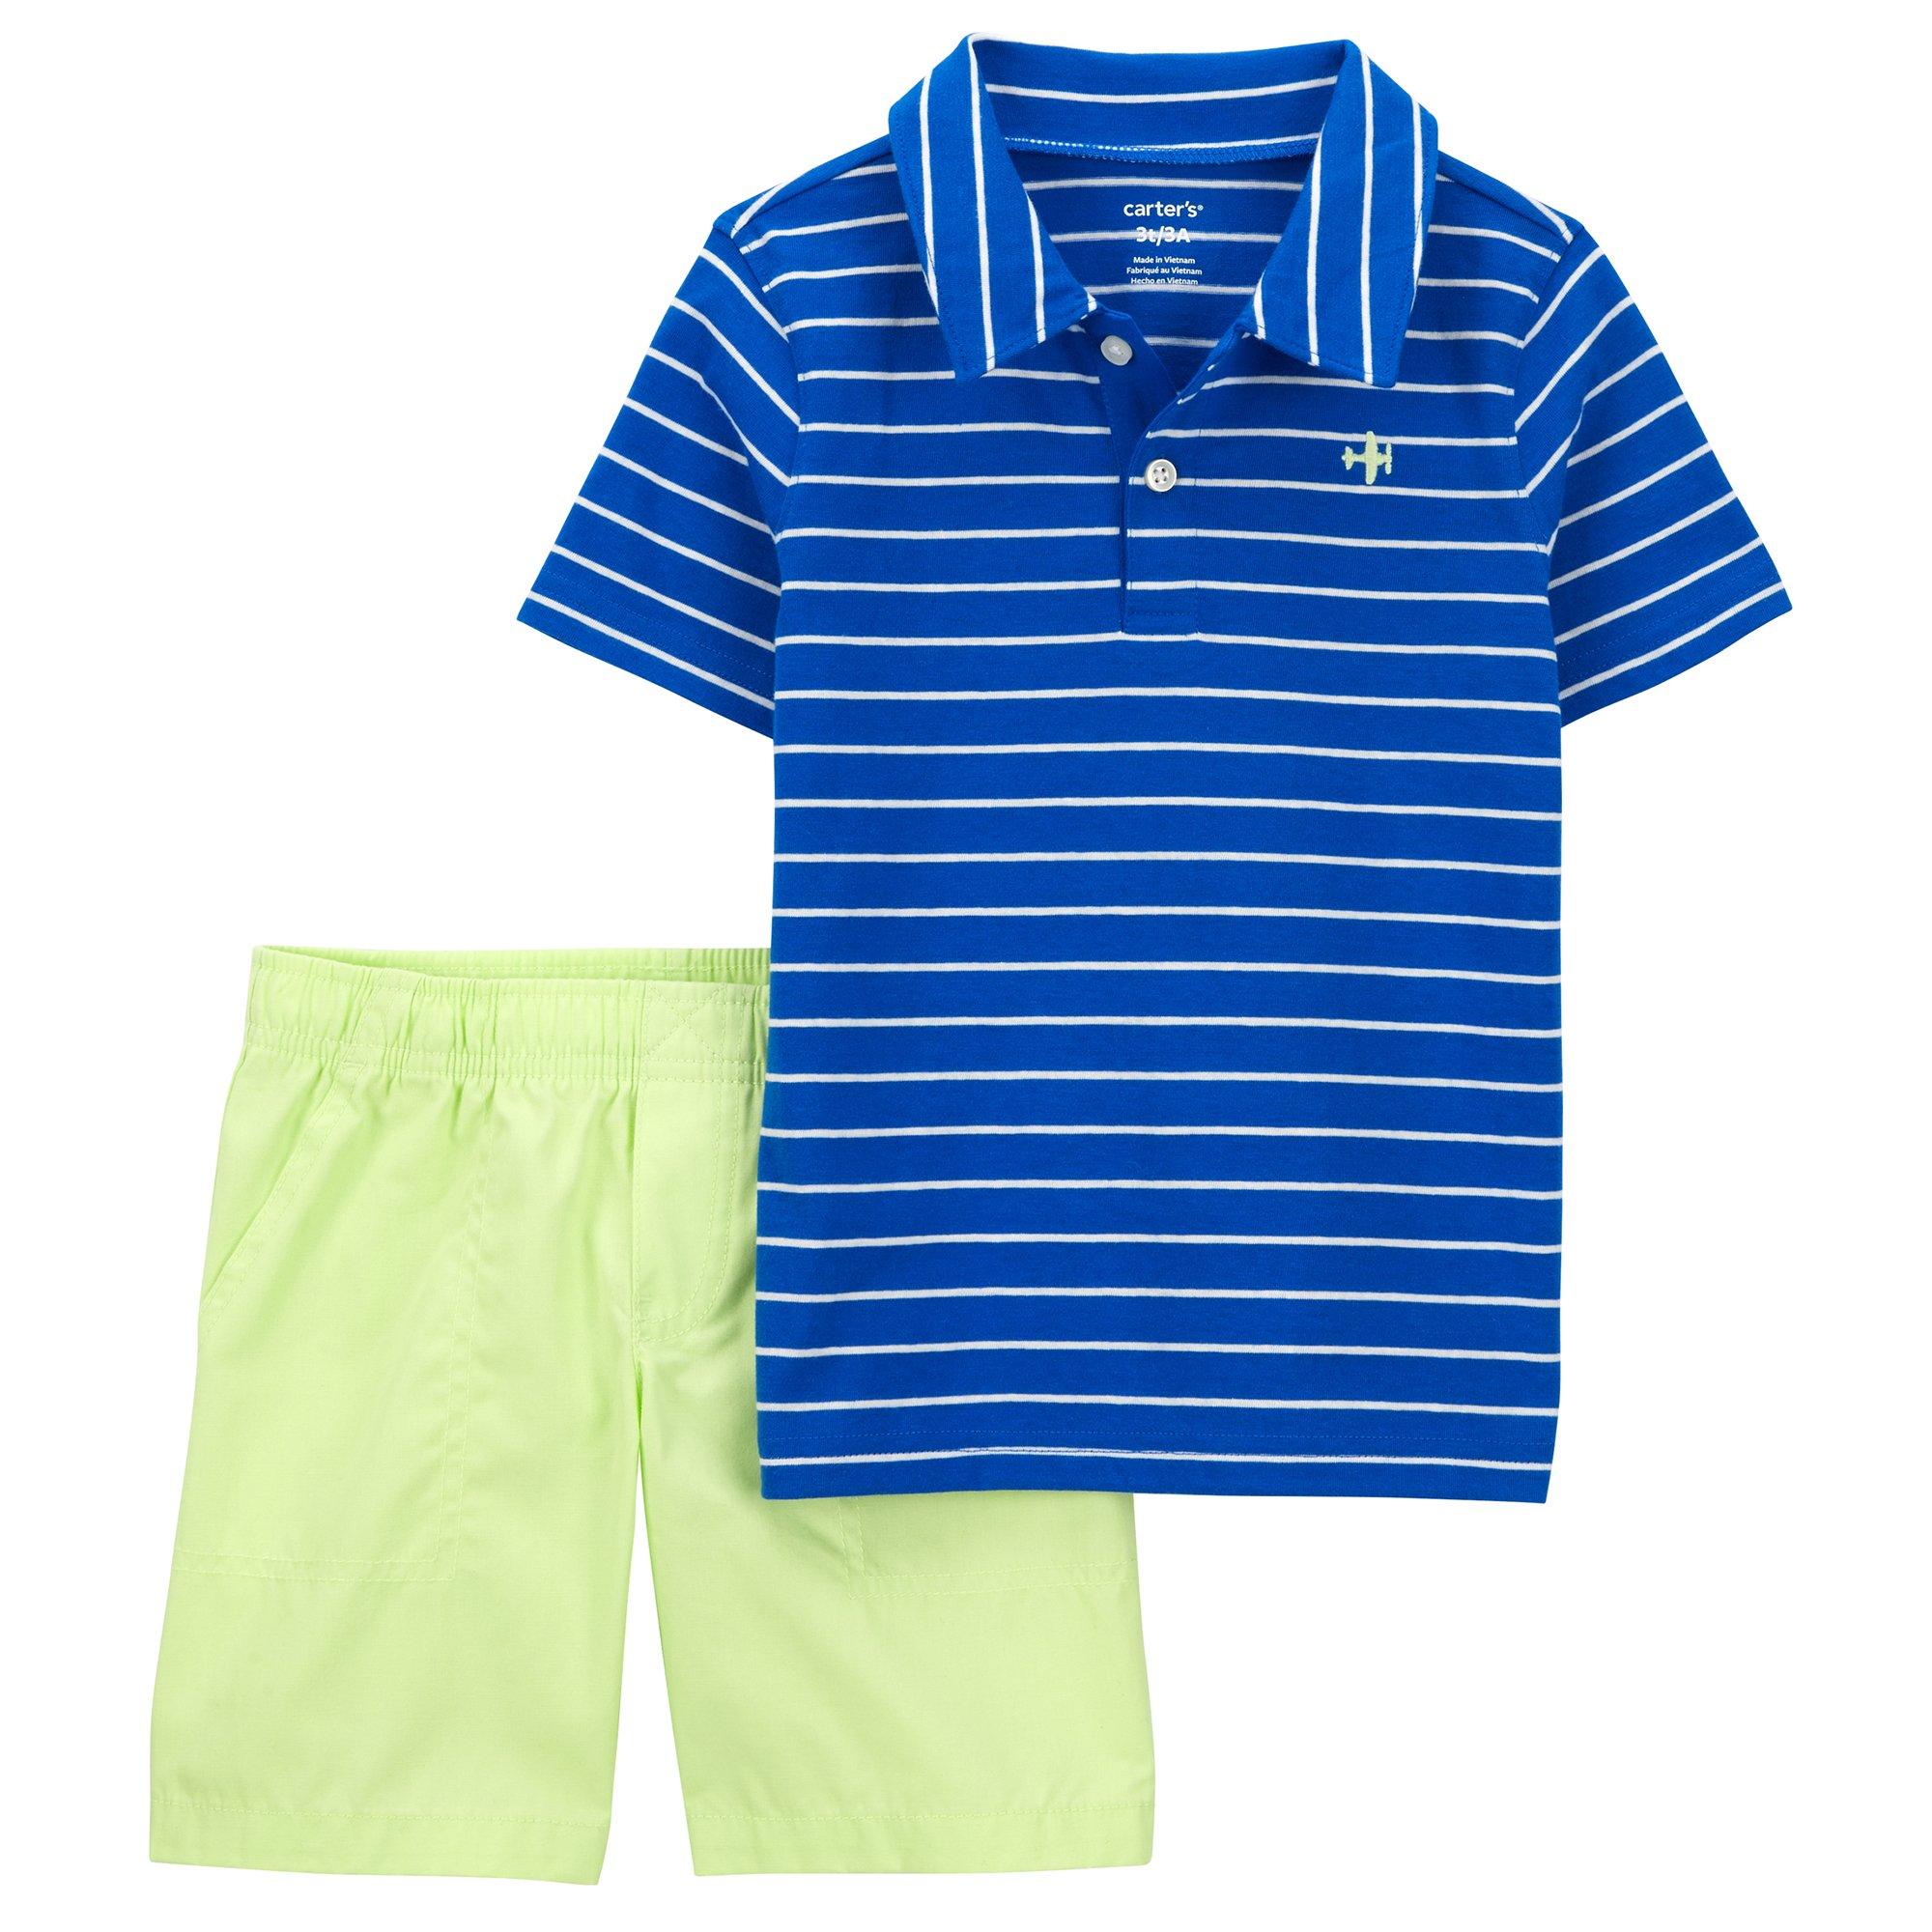 Toddler Boys 2-pc. Airplane Polo and Shorts Set